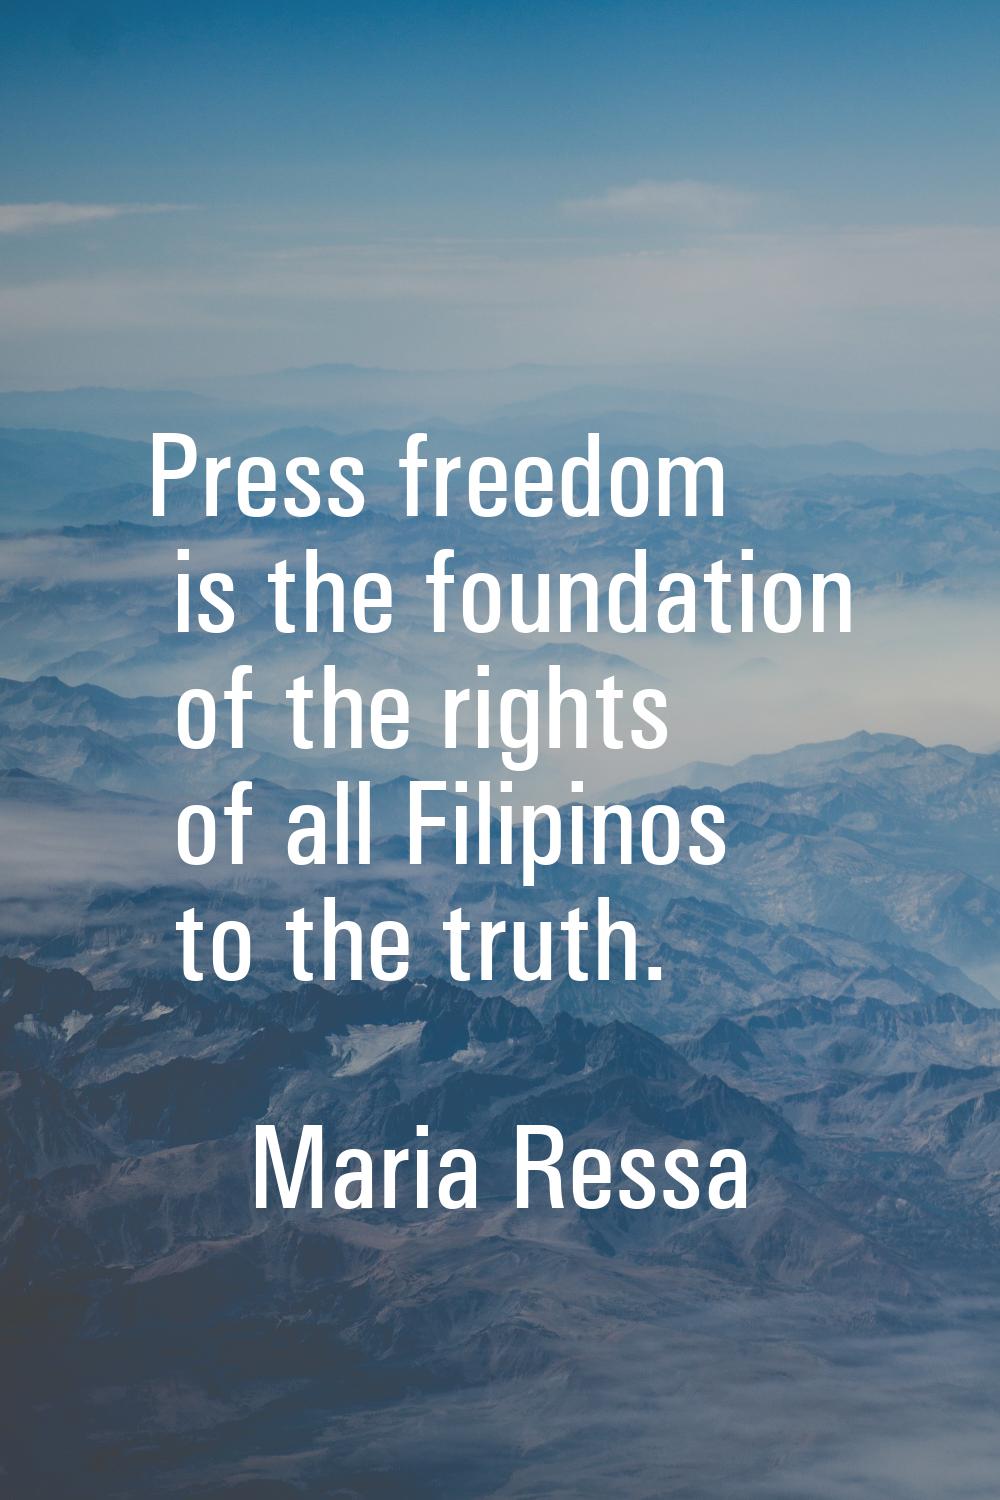 Press freedom is the foundation of the rights of all Filipinos to the truth.